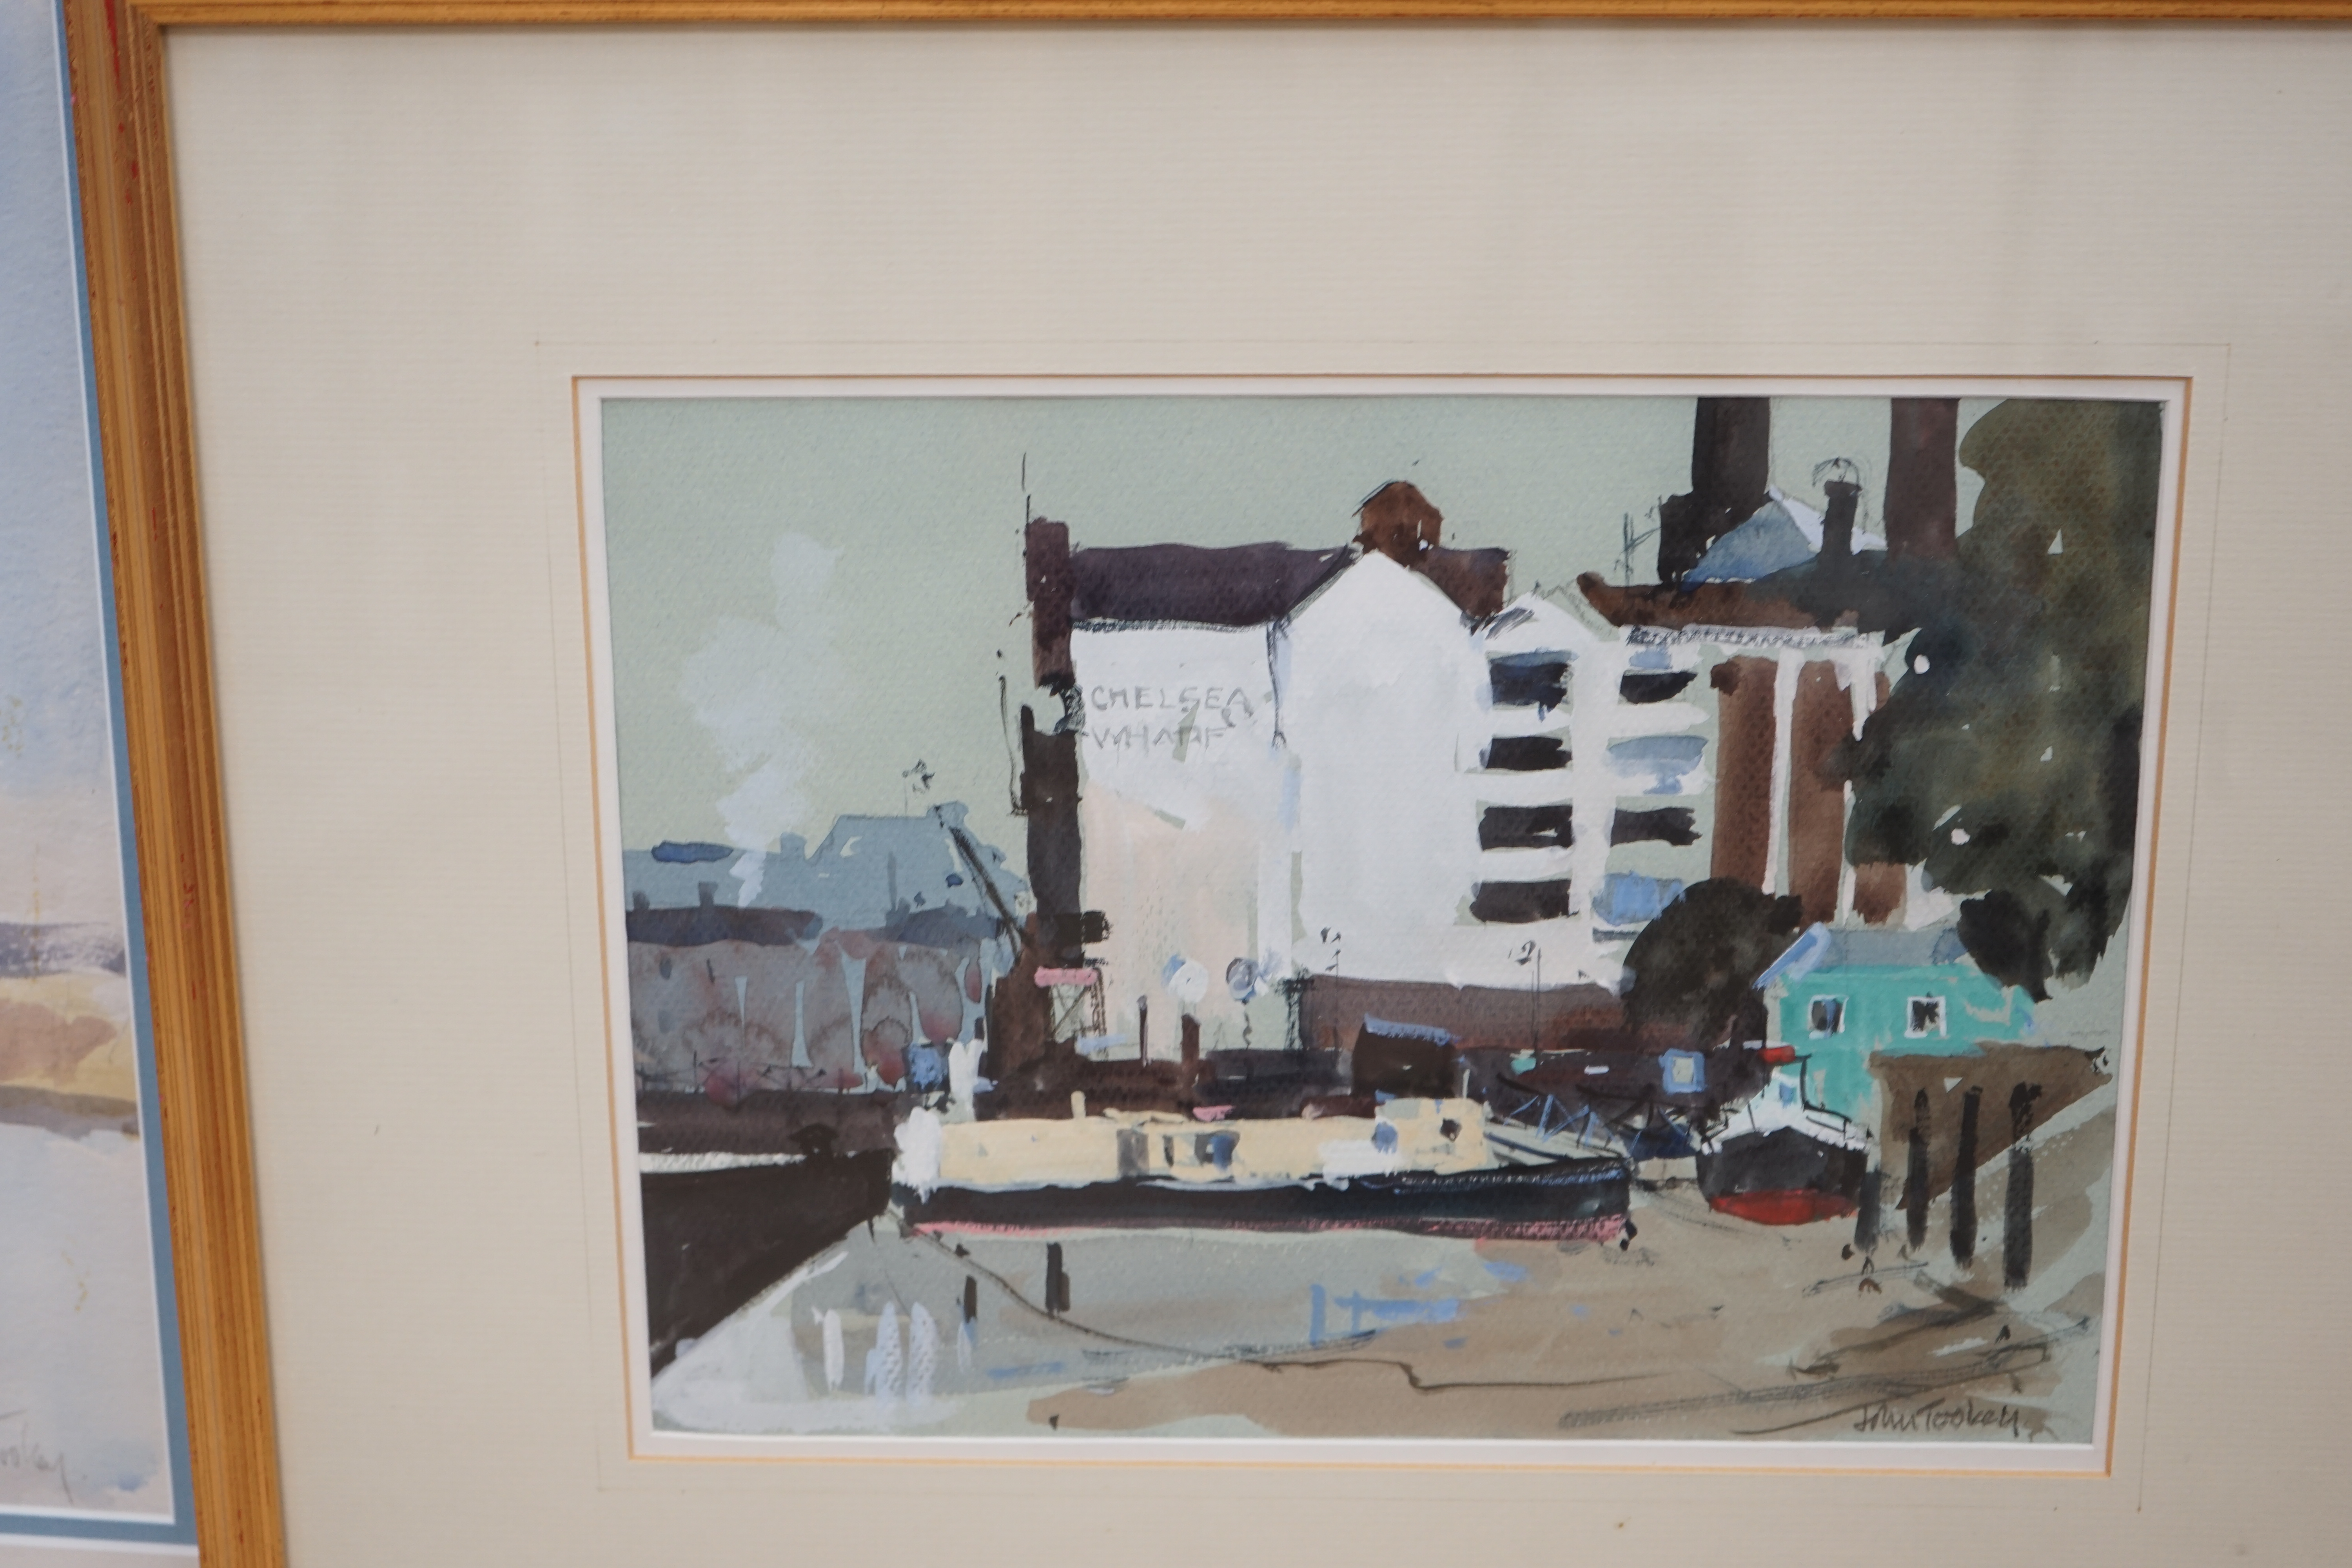 John Tookey (b.1947), three watercolours, including 'The Thames, Chelsea', two signed, largest 32 x 49cm. Condition - fair to good, some light discolouration and fading